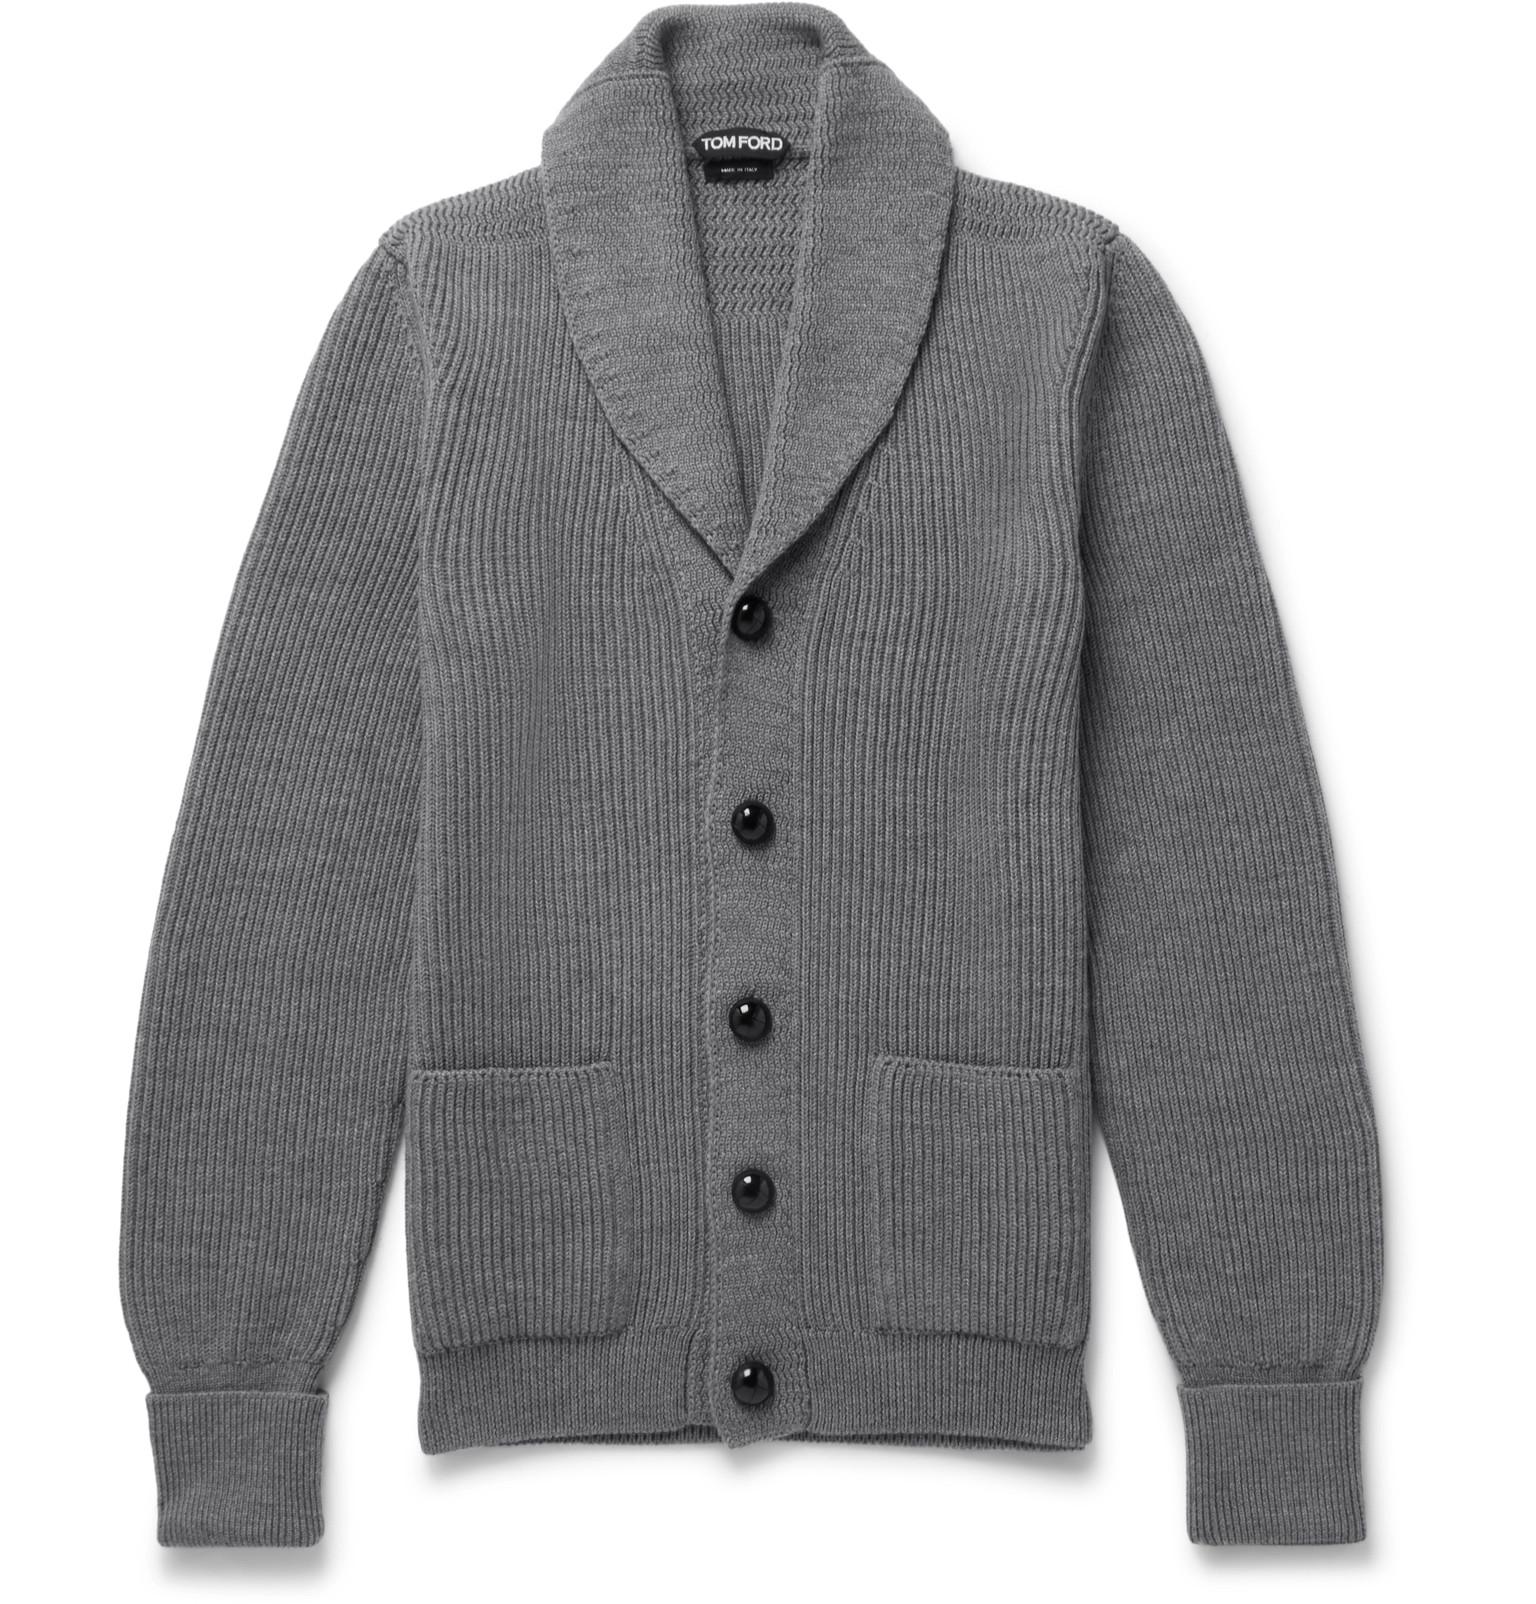 Lyst - Tom Ford Steve Mcqueen Shawl-collar Ribbed Wool Cardigan in Gray for Men